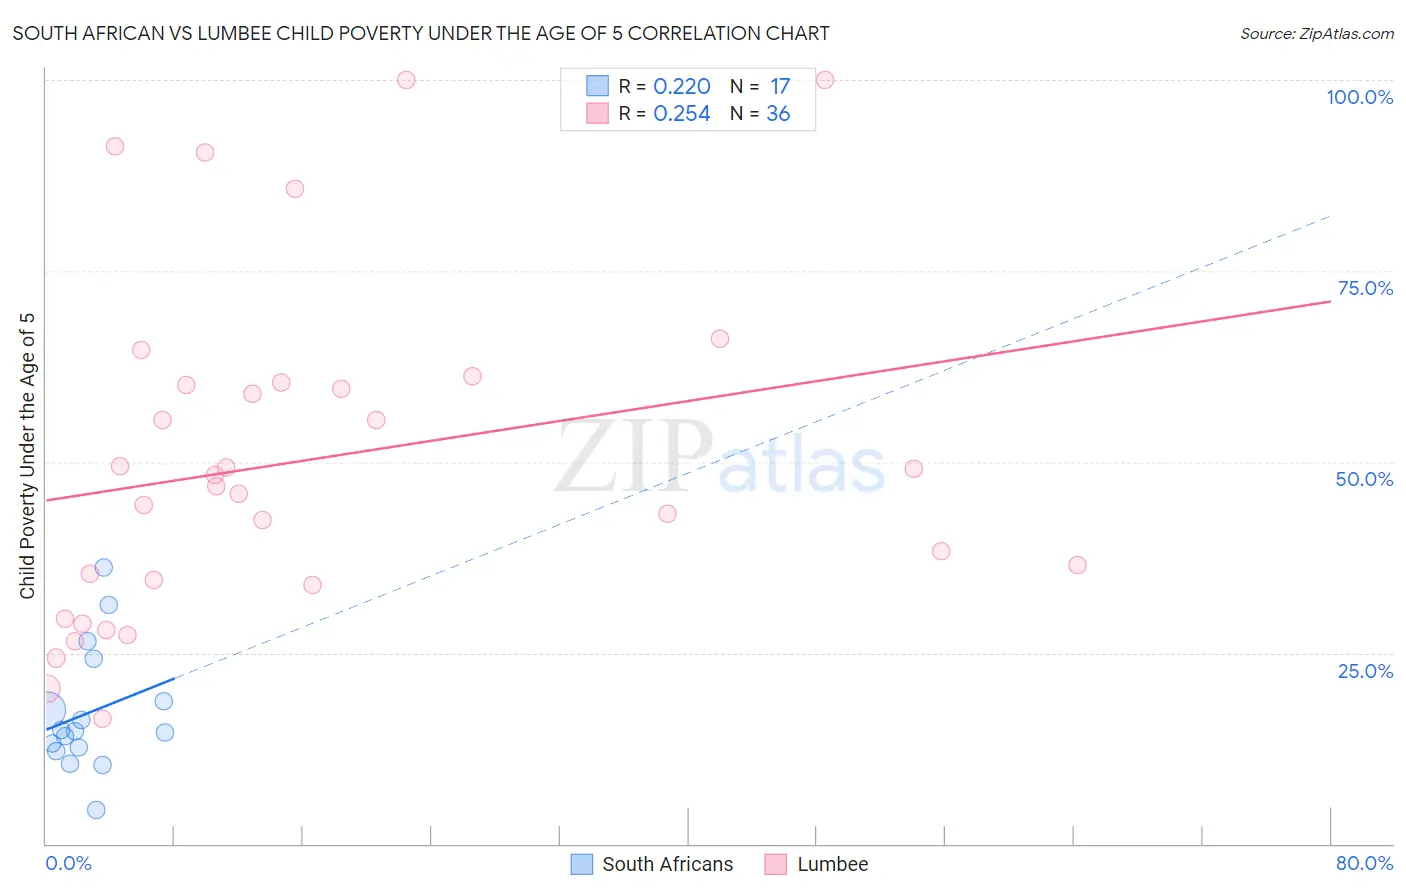 South African vs Lumbee Child Poverty Under the Age of 5